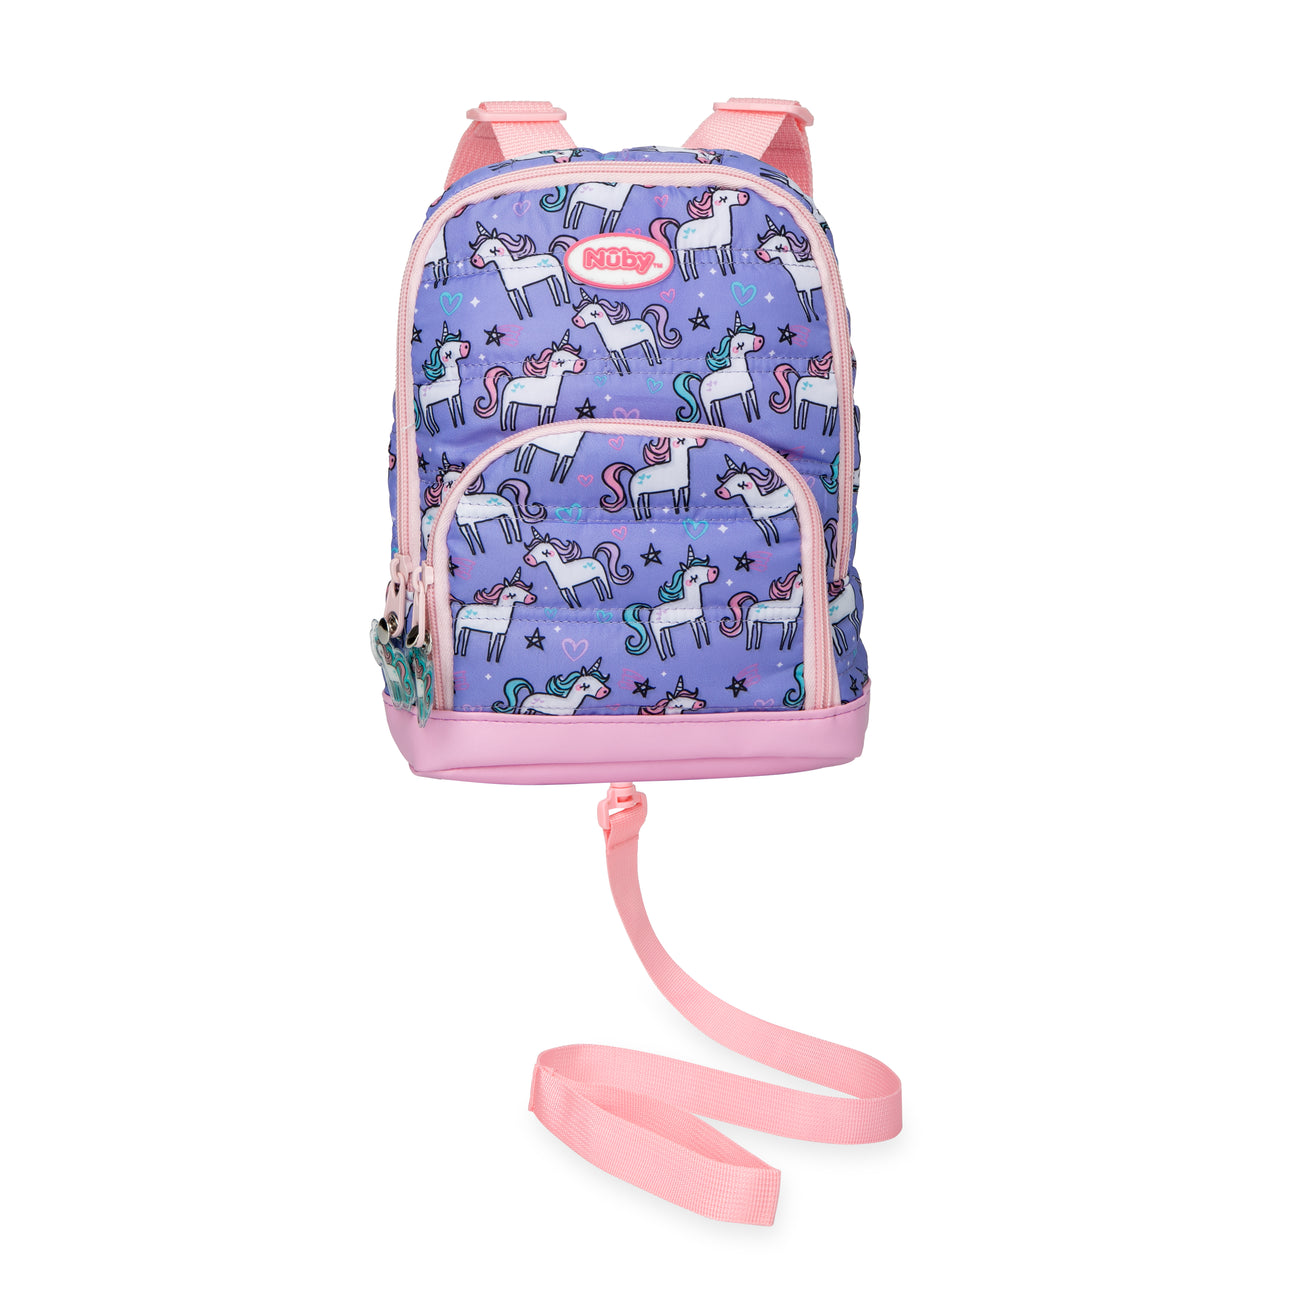 Unicorn Toddler Safety Harness Backpack